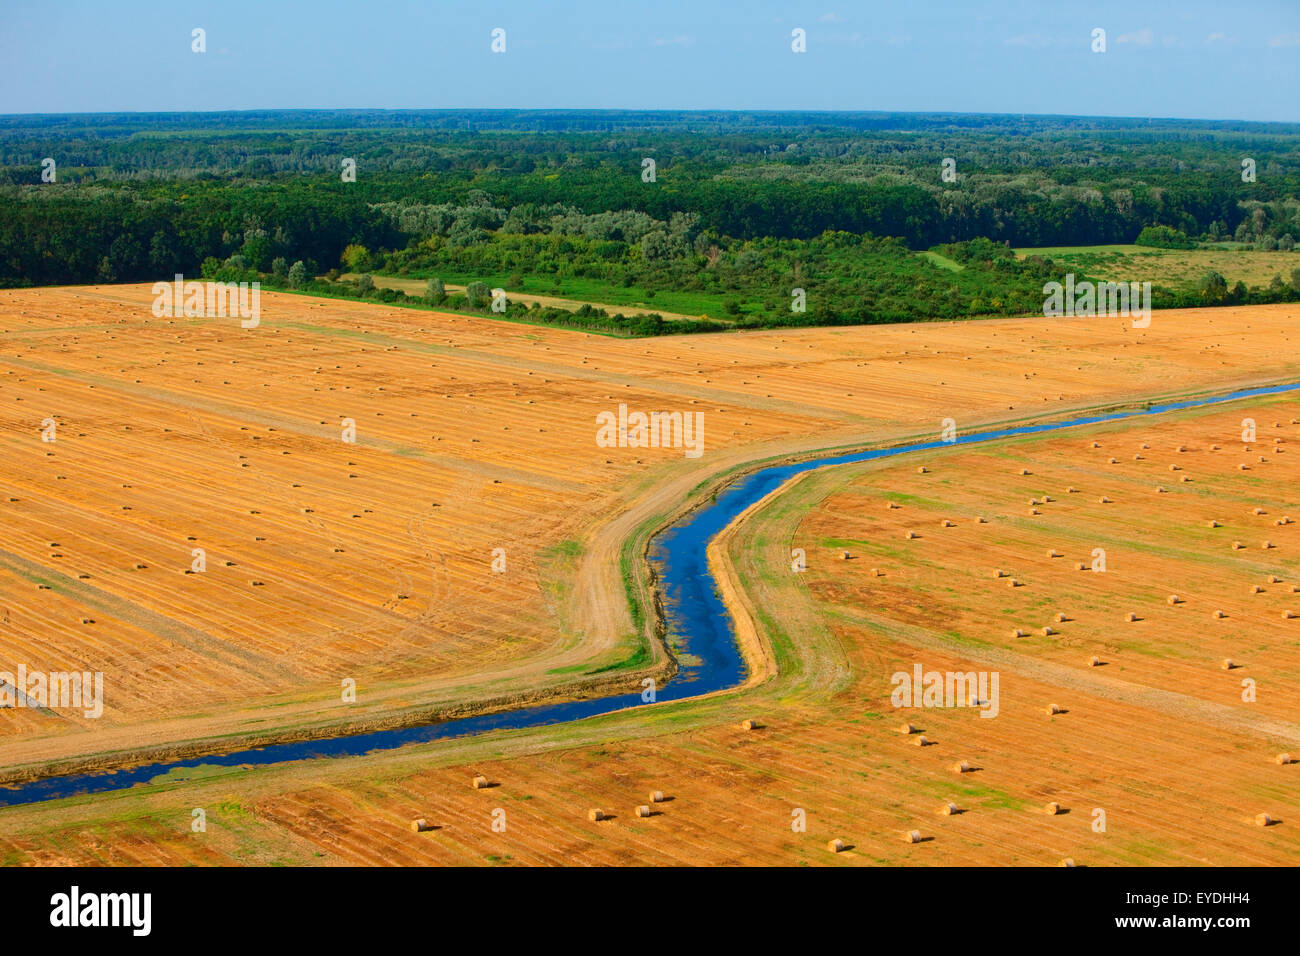 Aerial view of plowed fields with hay bales, Slavonia, Croatia Stock Photo